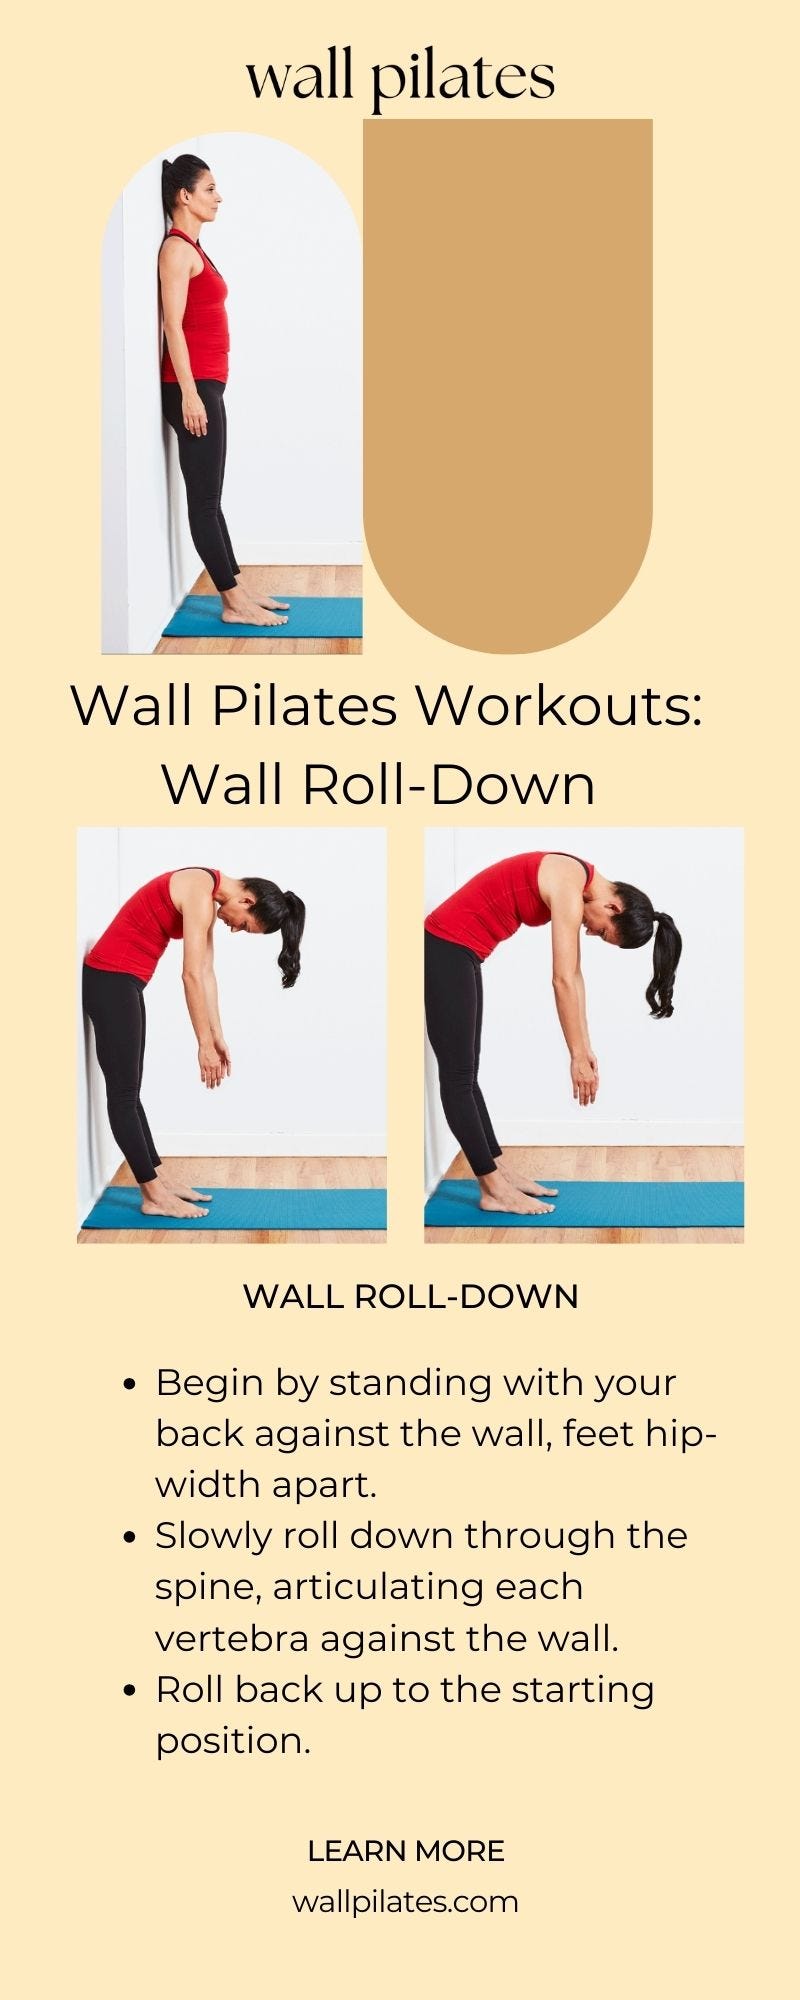 The Remarkable Health Benefits of Wall Pilates Exercise, by Wall Pilates